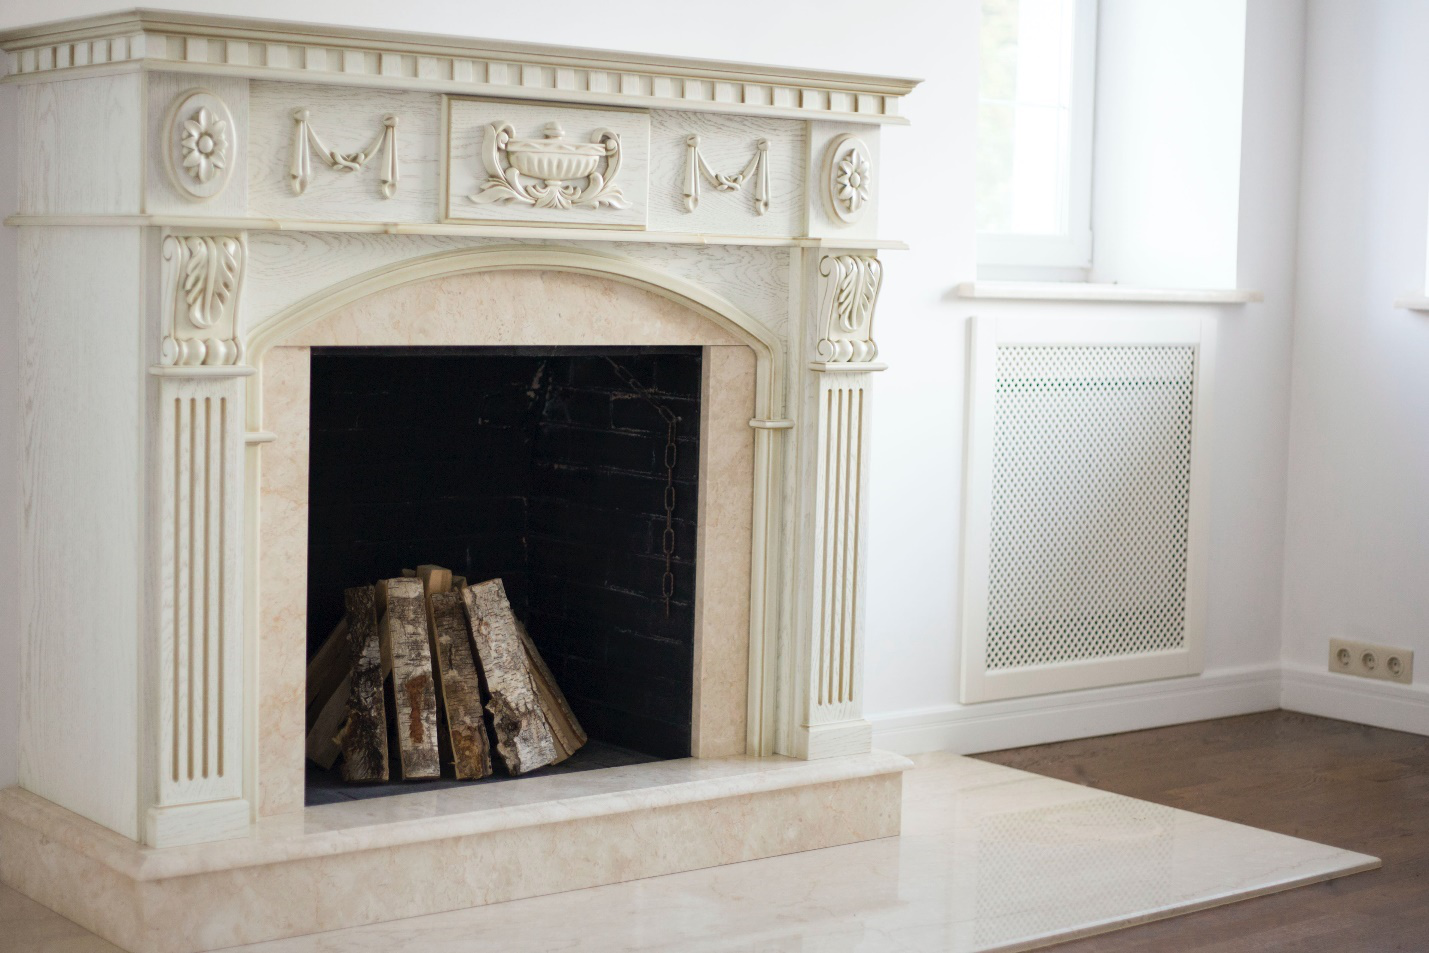 You are currently viewing 3 Things to Keep In Mind When Designing a Fireplace For Your Home